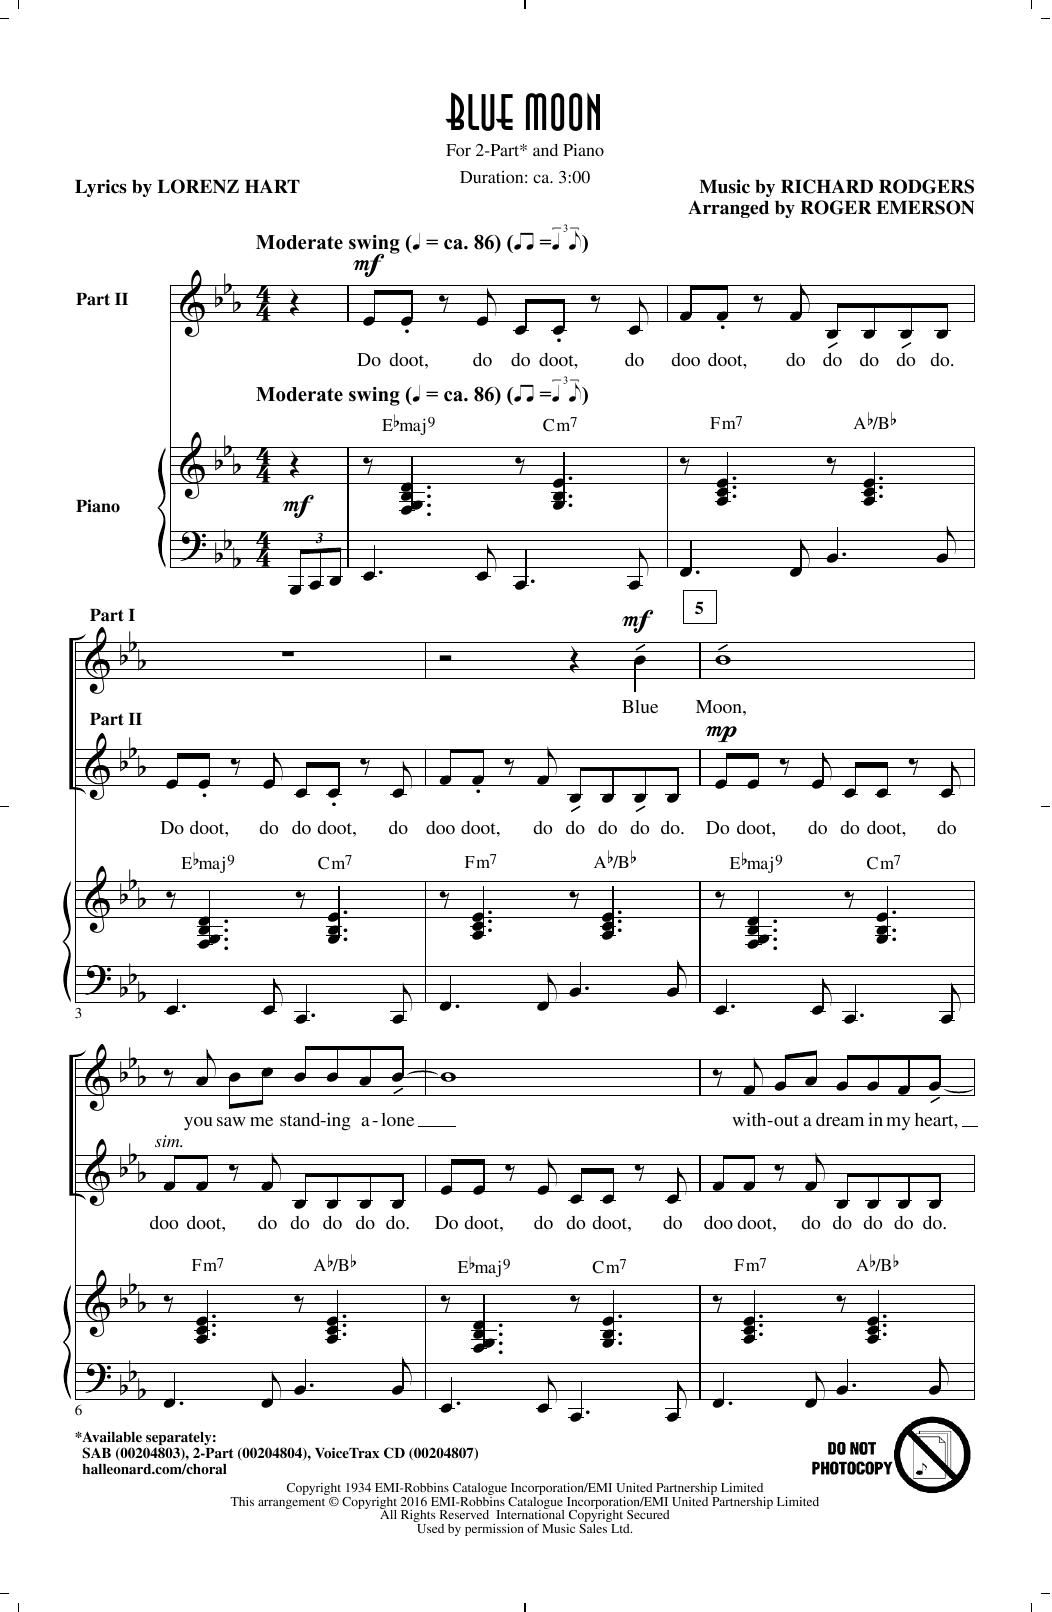 Roger Emerson Blue Moon sheet music notes and chords. Download Printable PDF.